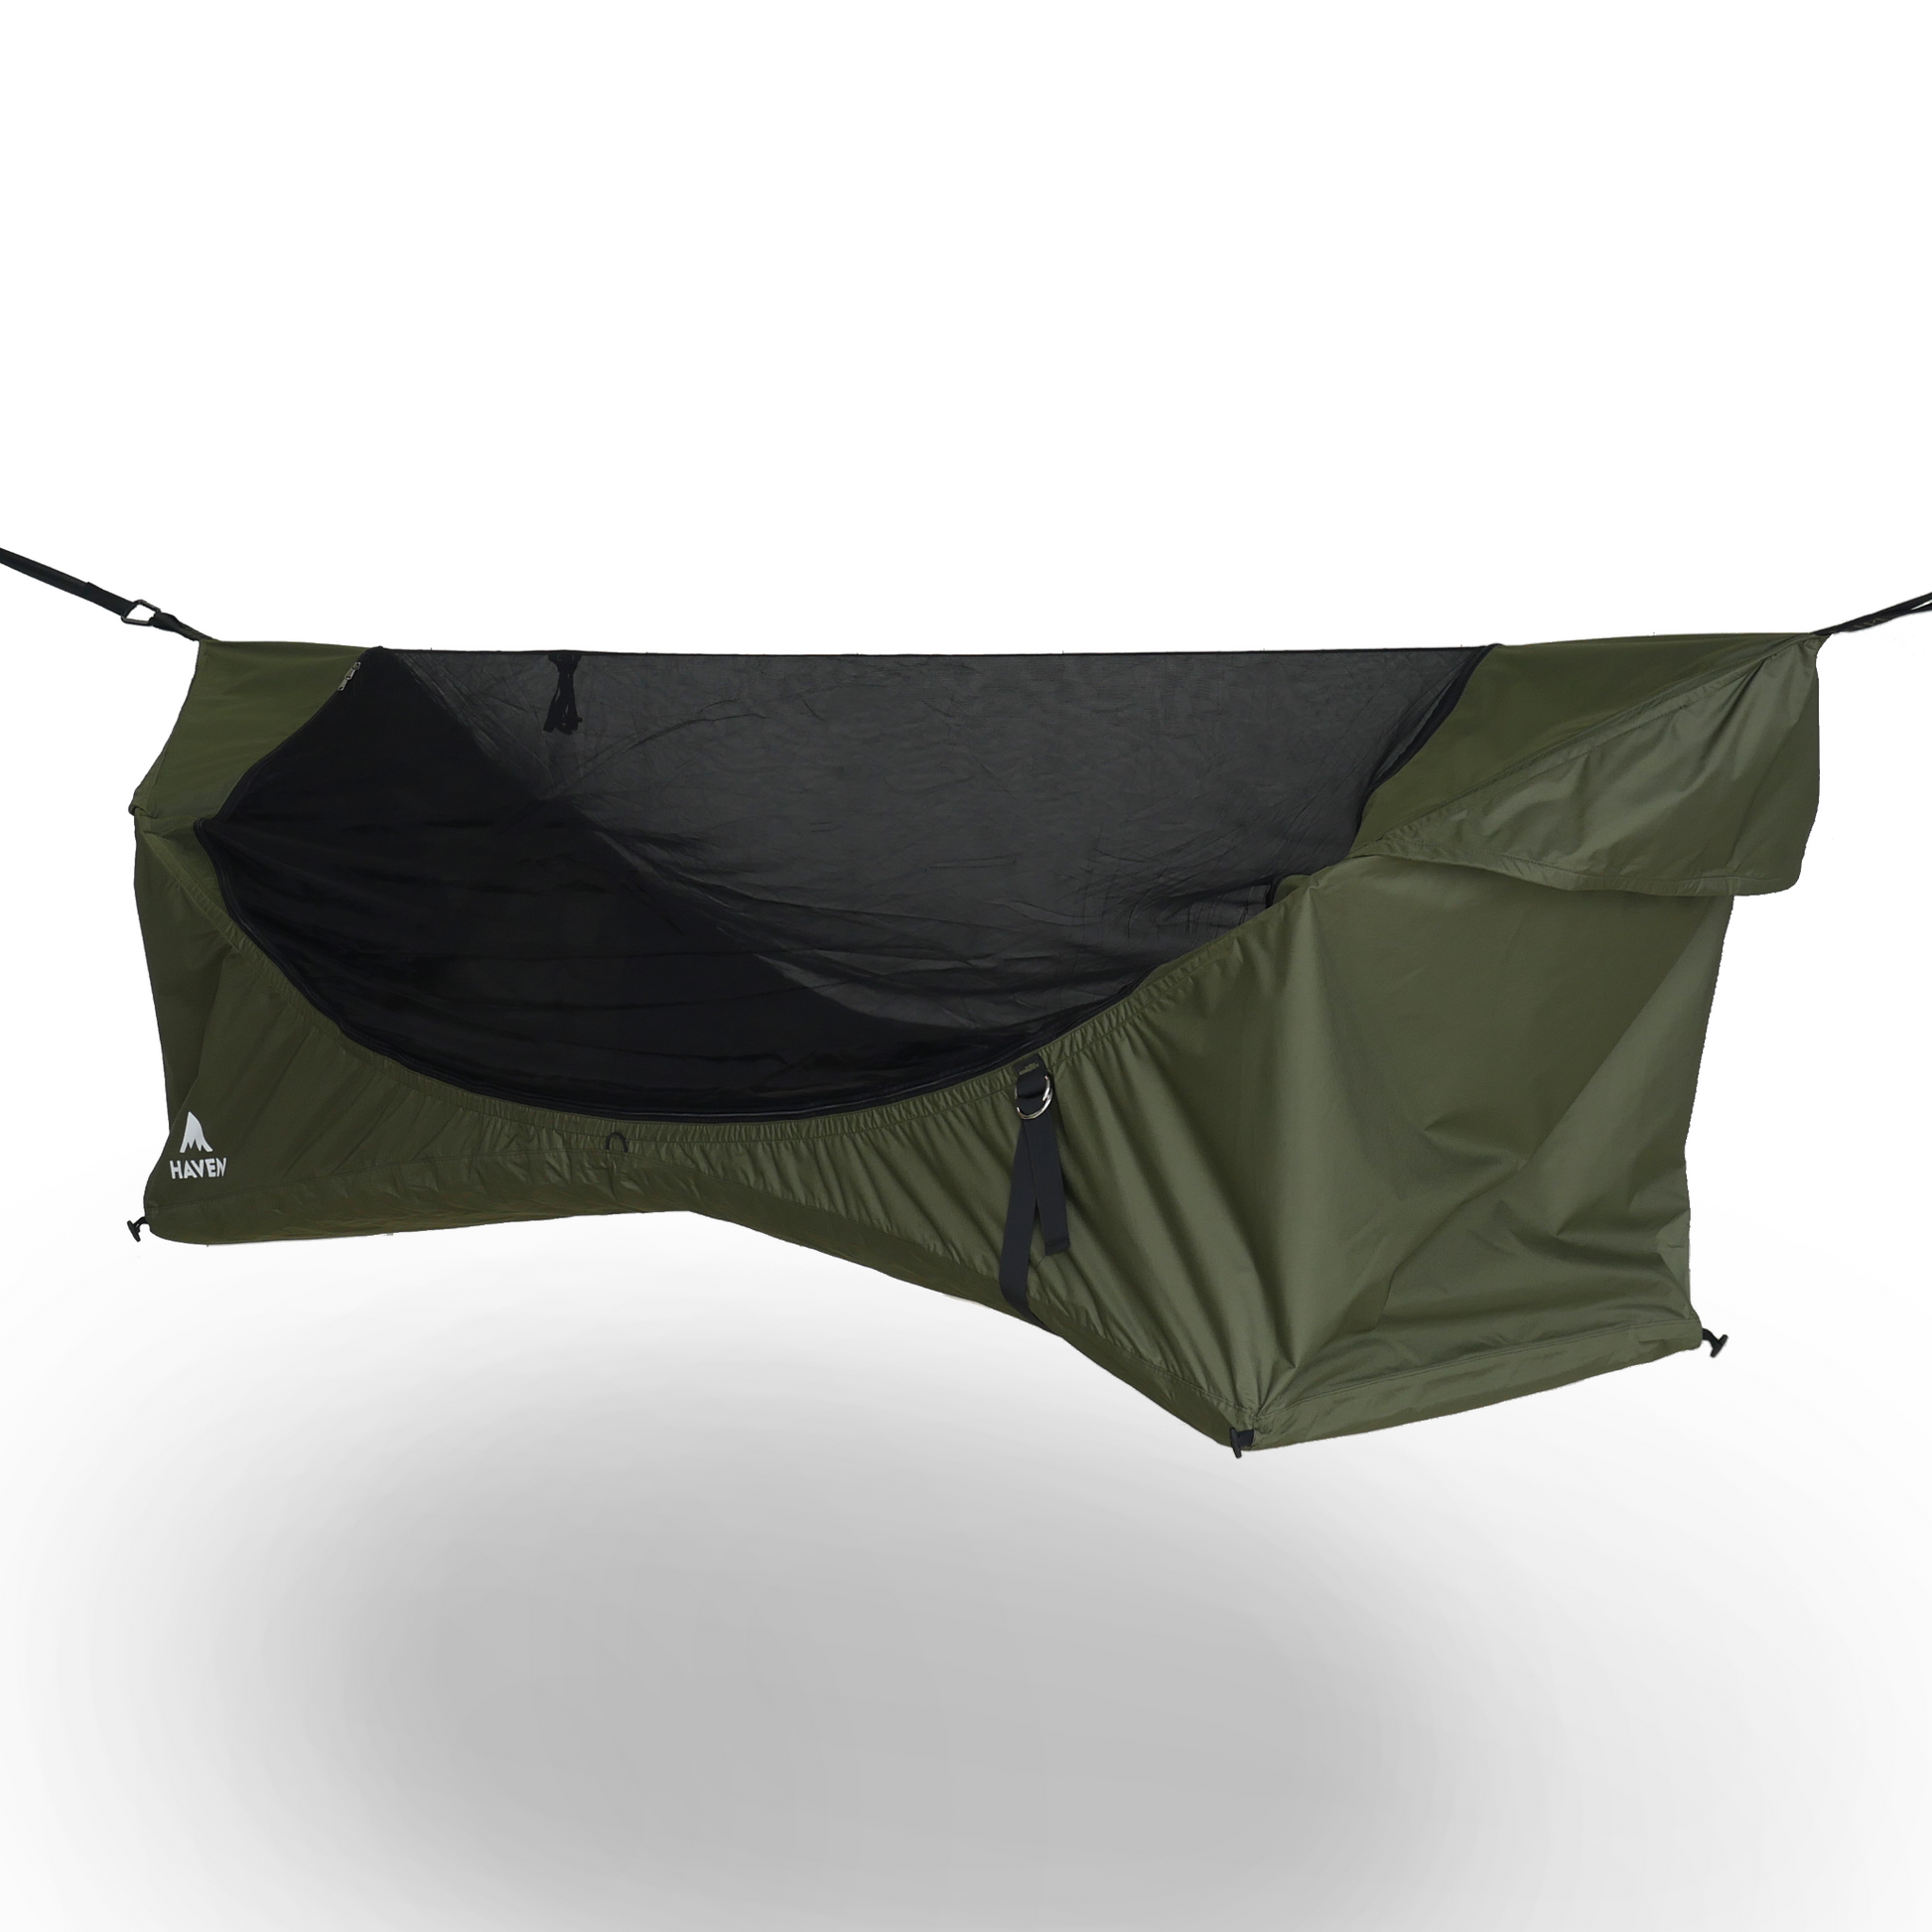 Green camping hammock kit with a bug net